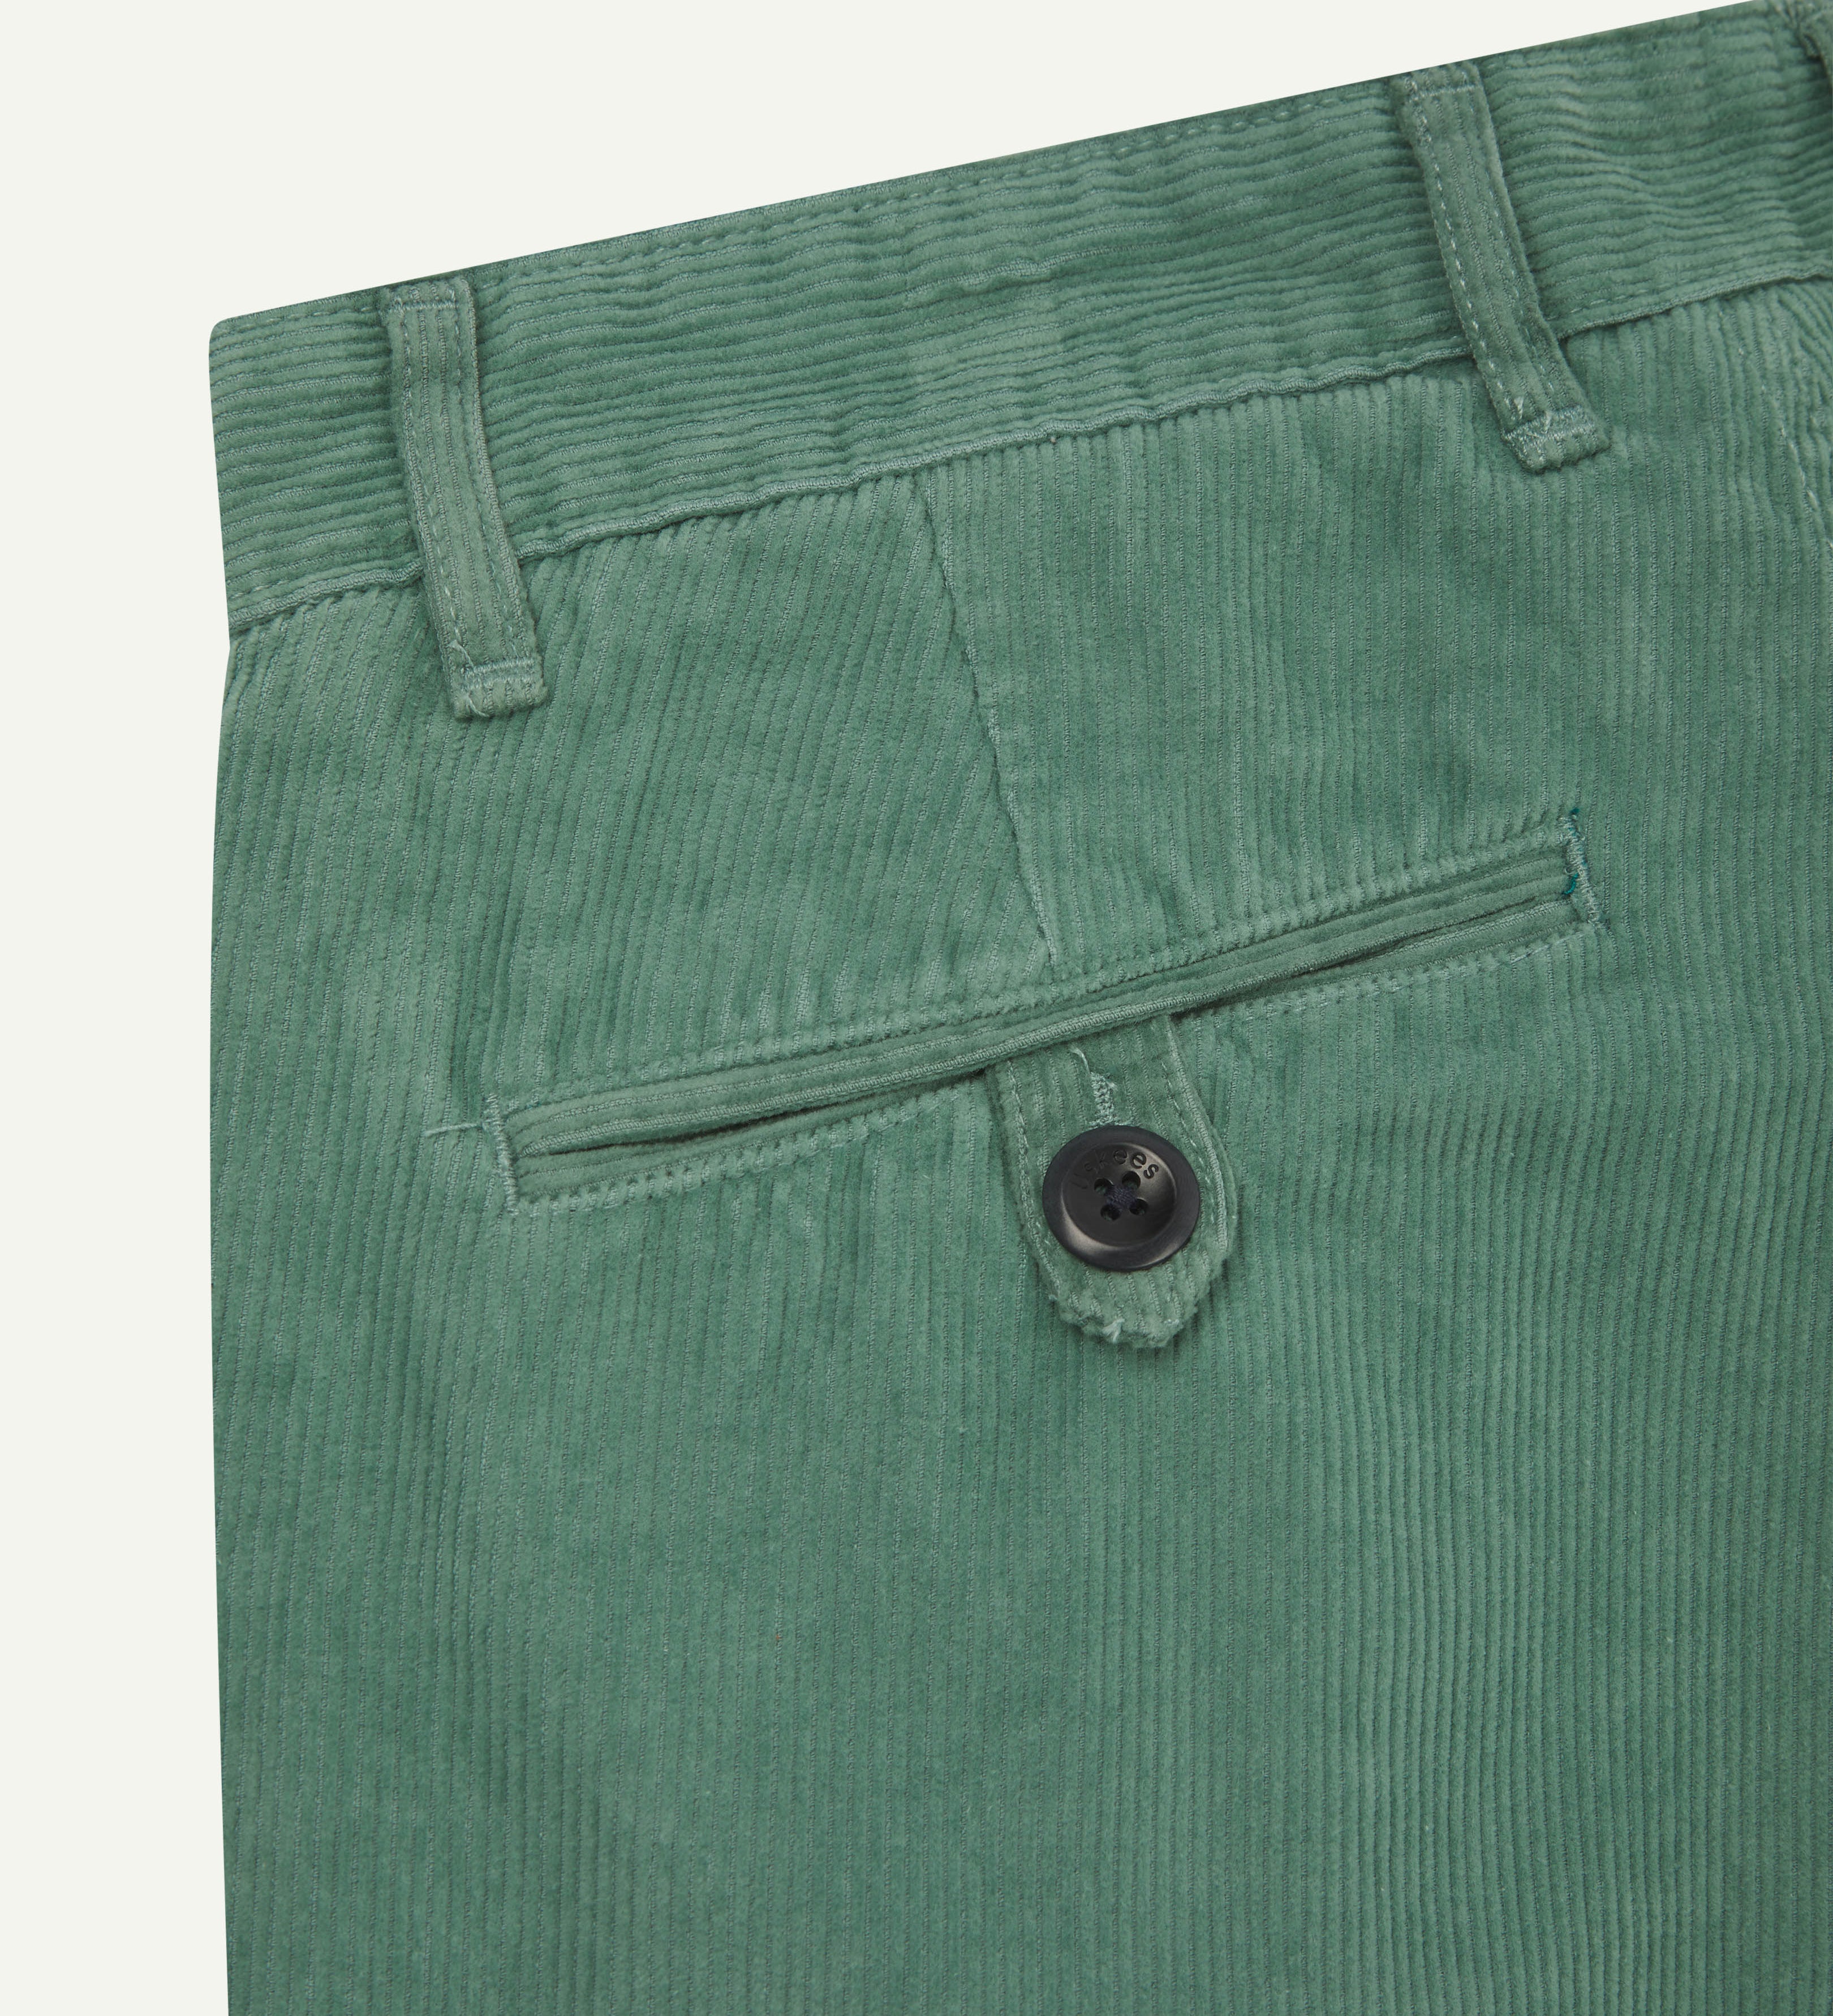 Back close-up shot of #5018 Uskees men's organic corduroy boat trousers in light green showing belt loops and buttoned back pocket.